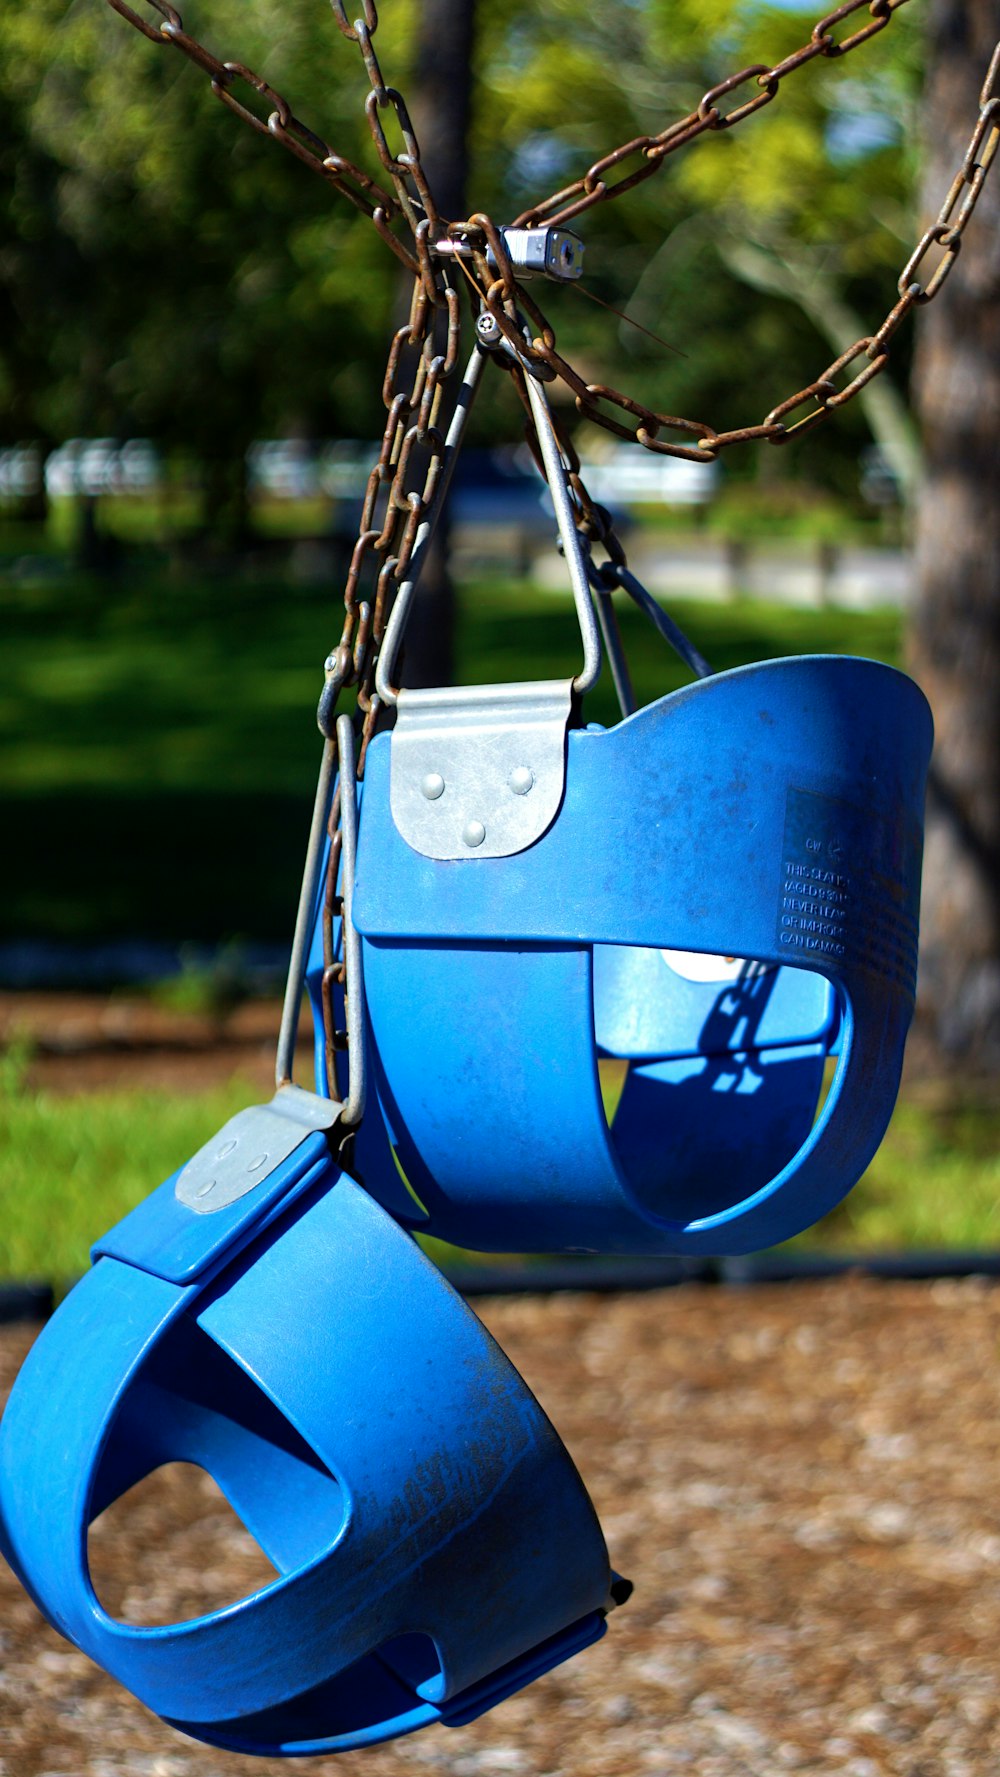 blue swing chair on green grass field during daytime